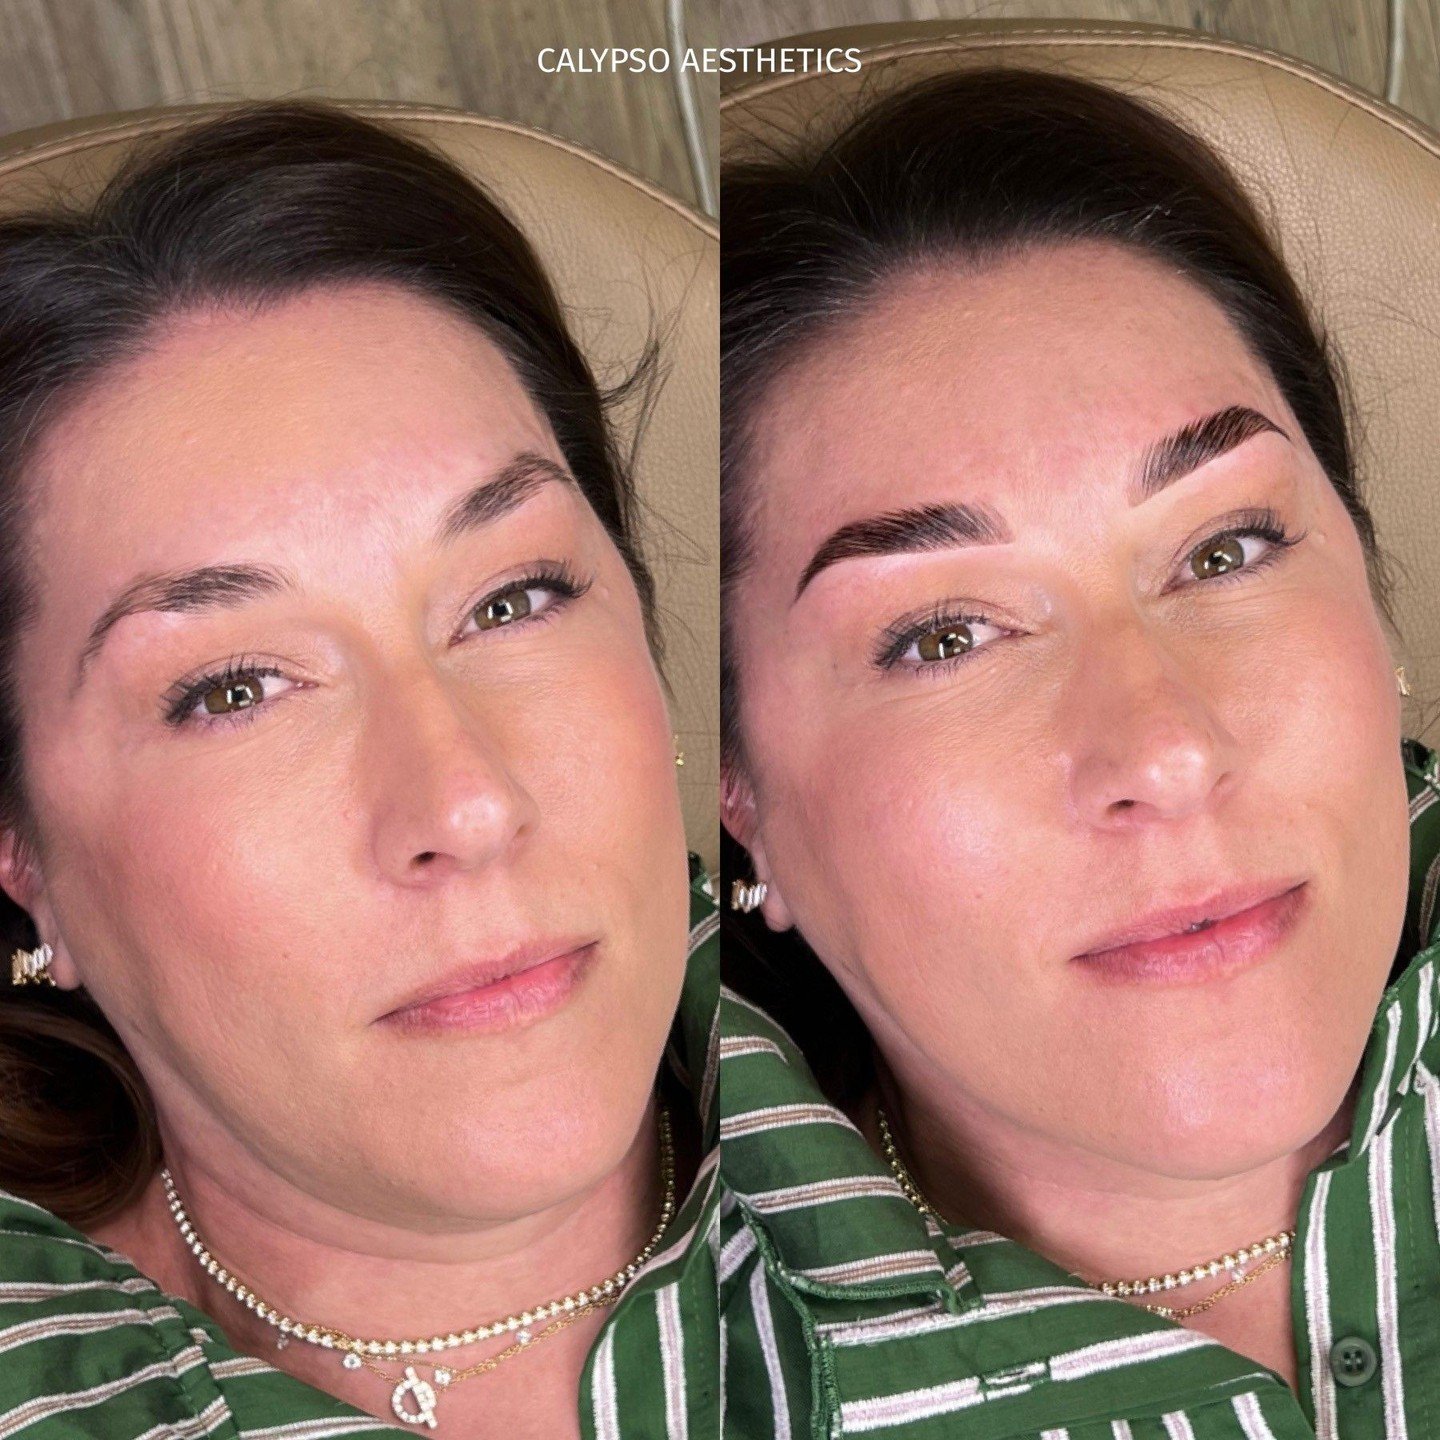 Effortlessly full brows are one of our favorite treatments at Calypso! ⁠
⁠
This beautiful patient received a brow tint and lamination for a more defined brow shape from @browsbylomuns! One of our favorite benefits of this treatment is it's low mainte